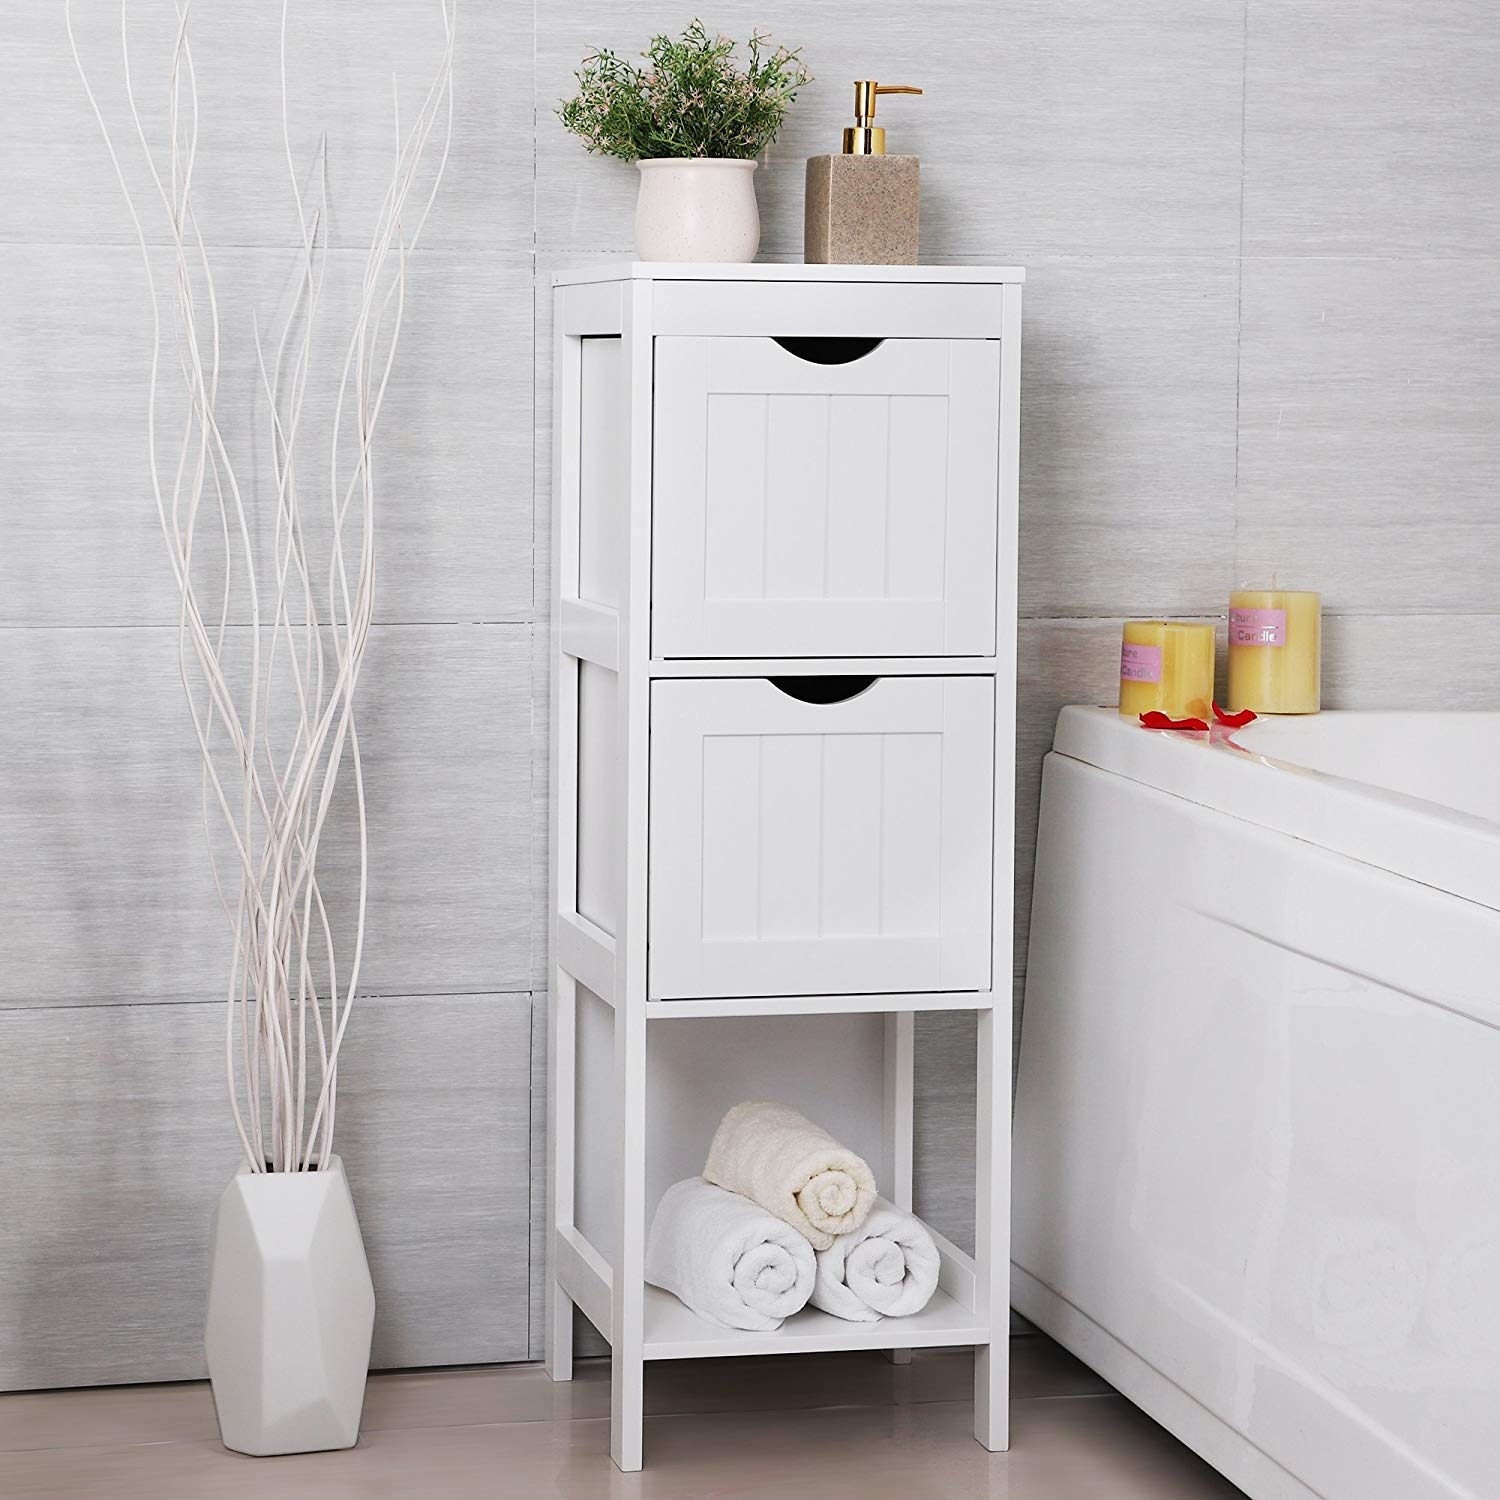 FurnitureR Storage Cabinets Floor Cabinet with Doors and Shelves Metal Organizer Unit Free Standing Collection 2 Tier Printing in White for Bathroom Living Room Home Office 